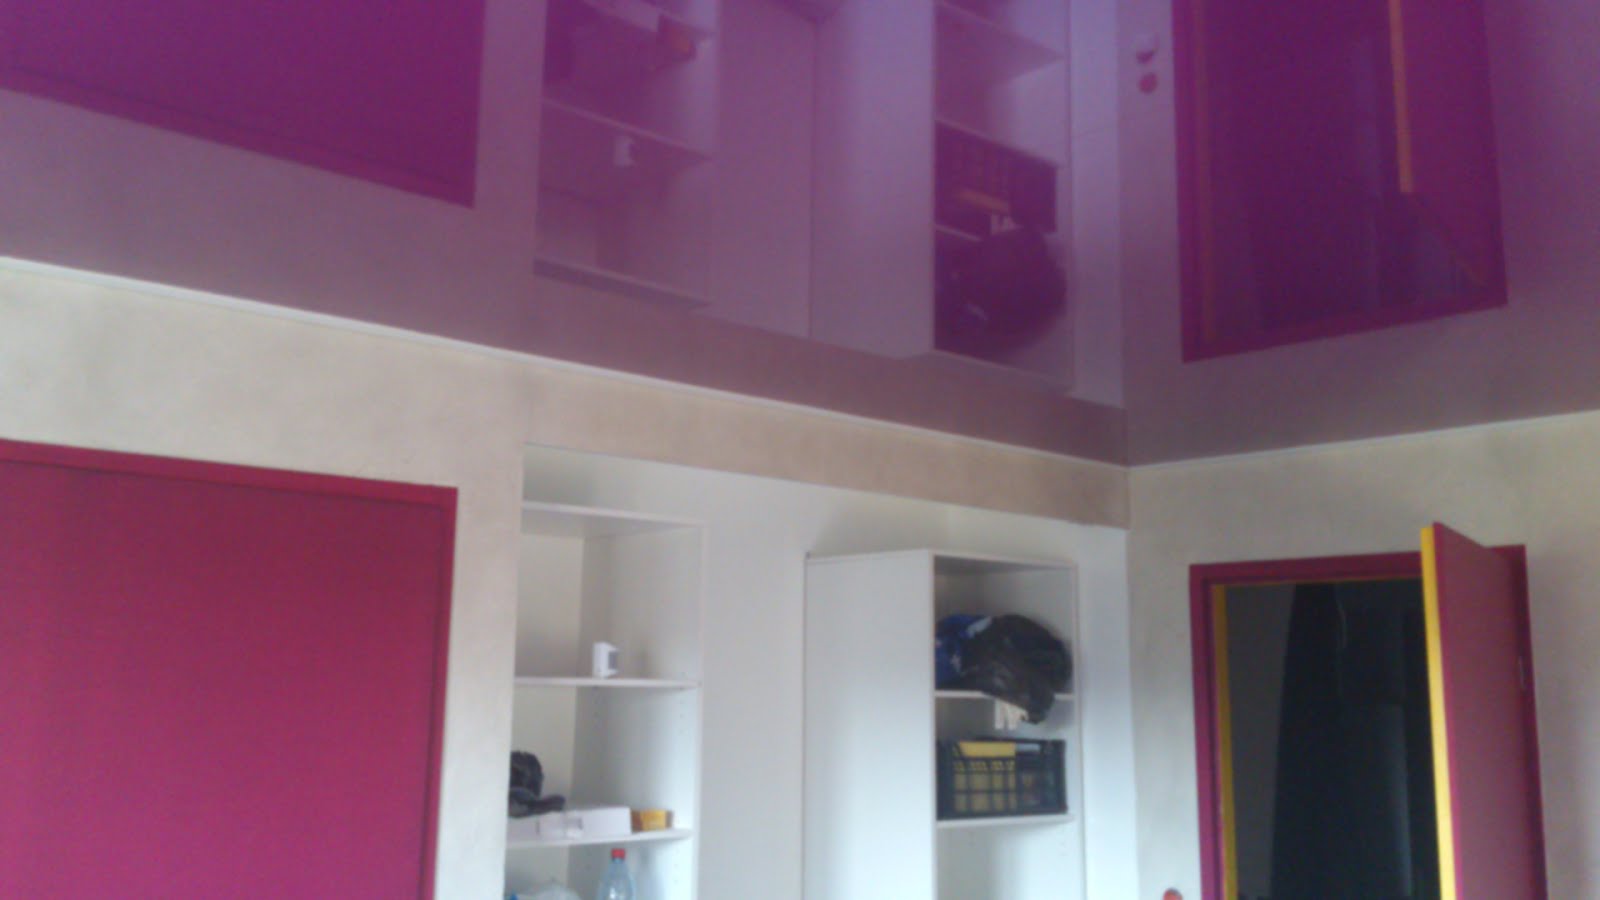 new construction, renovation, design and decoration project, as an alternative or a complement